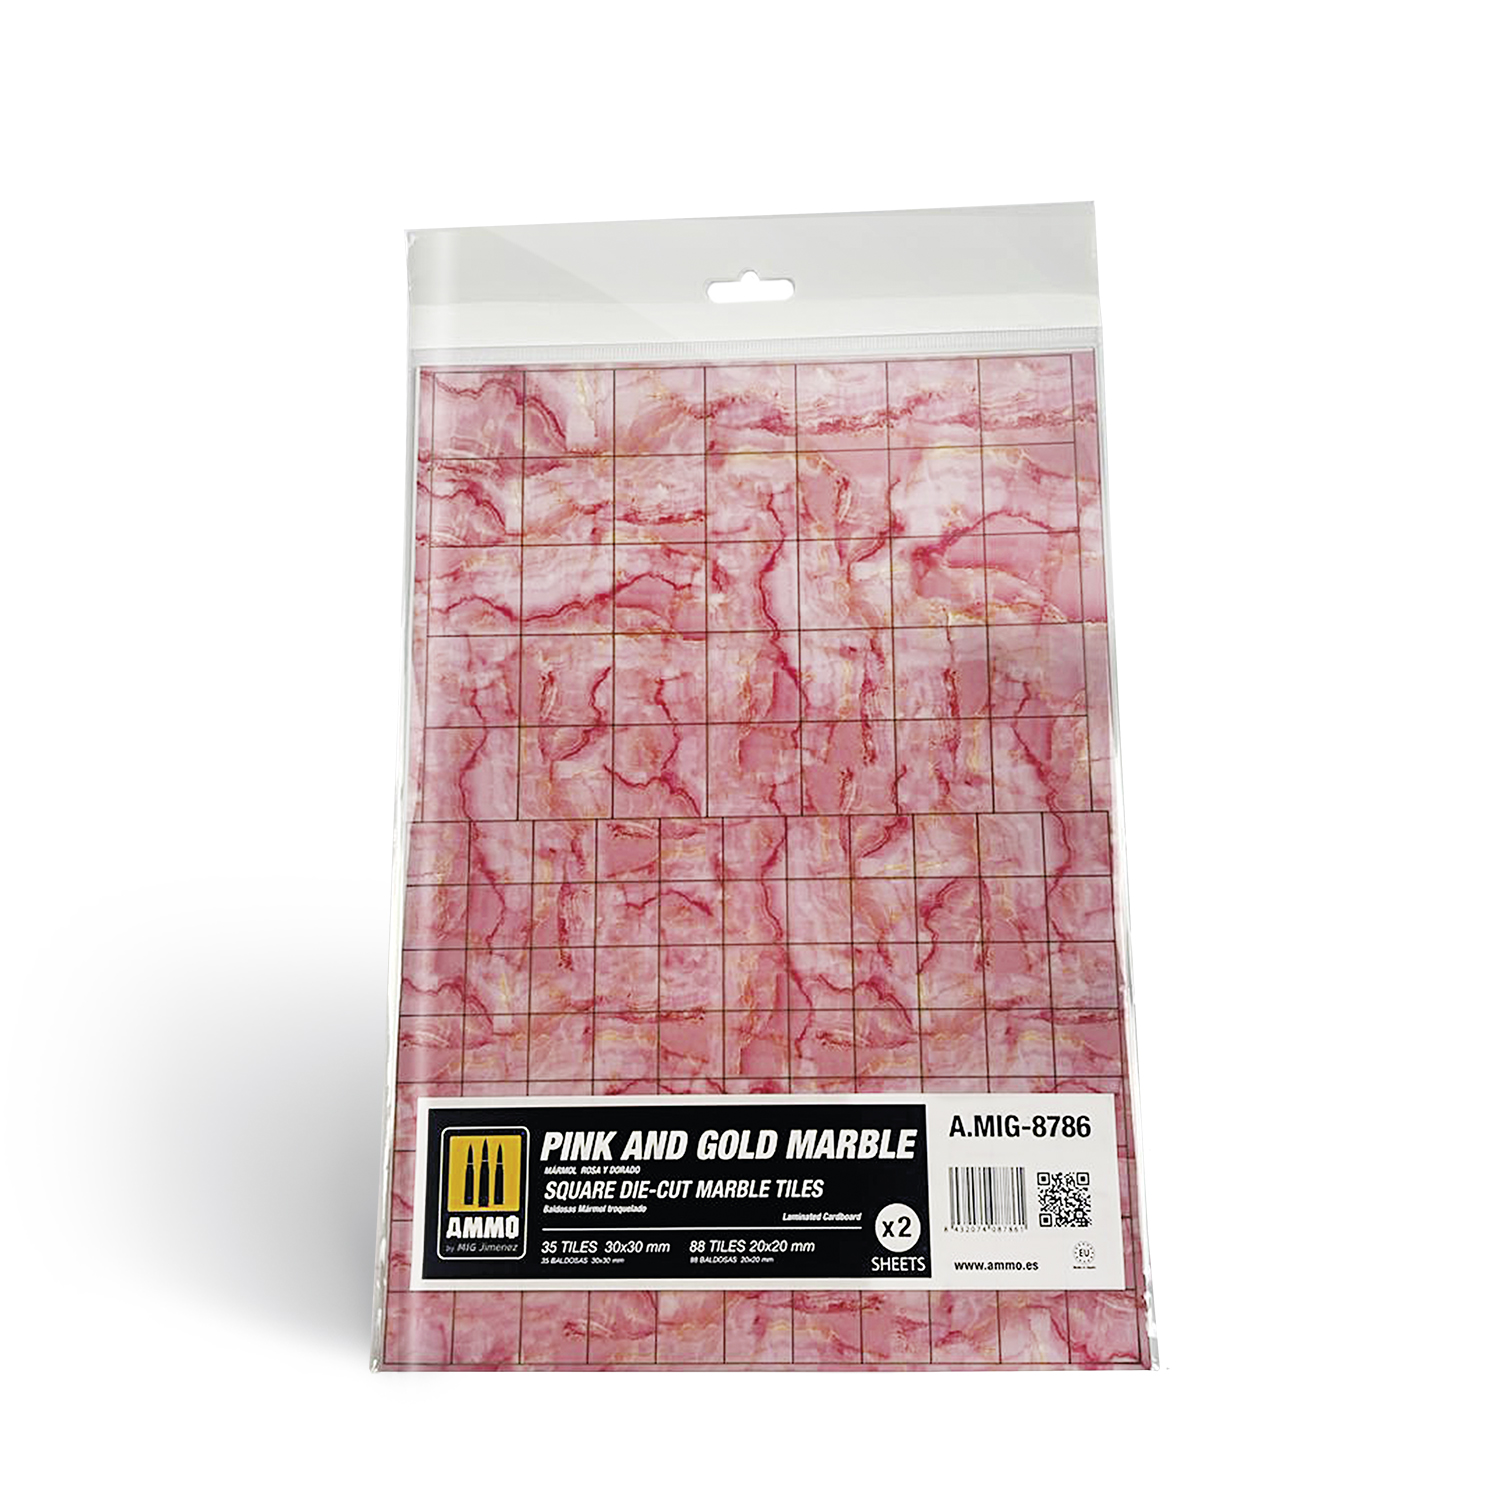 MIG8786 Pink and Gold Marble. Square die-cut marble tiles